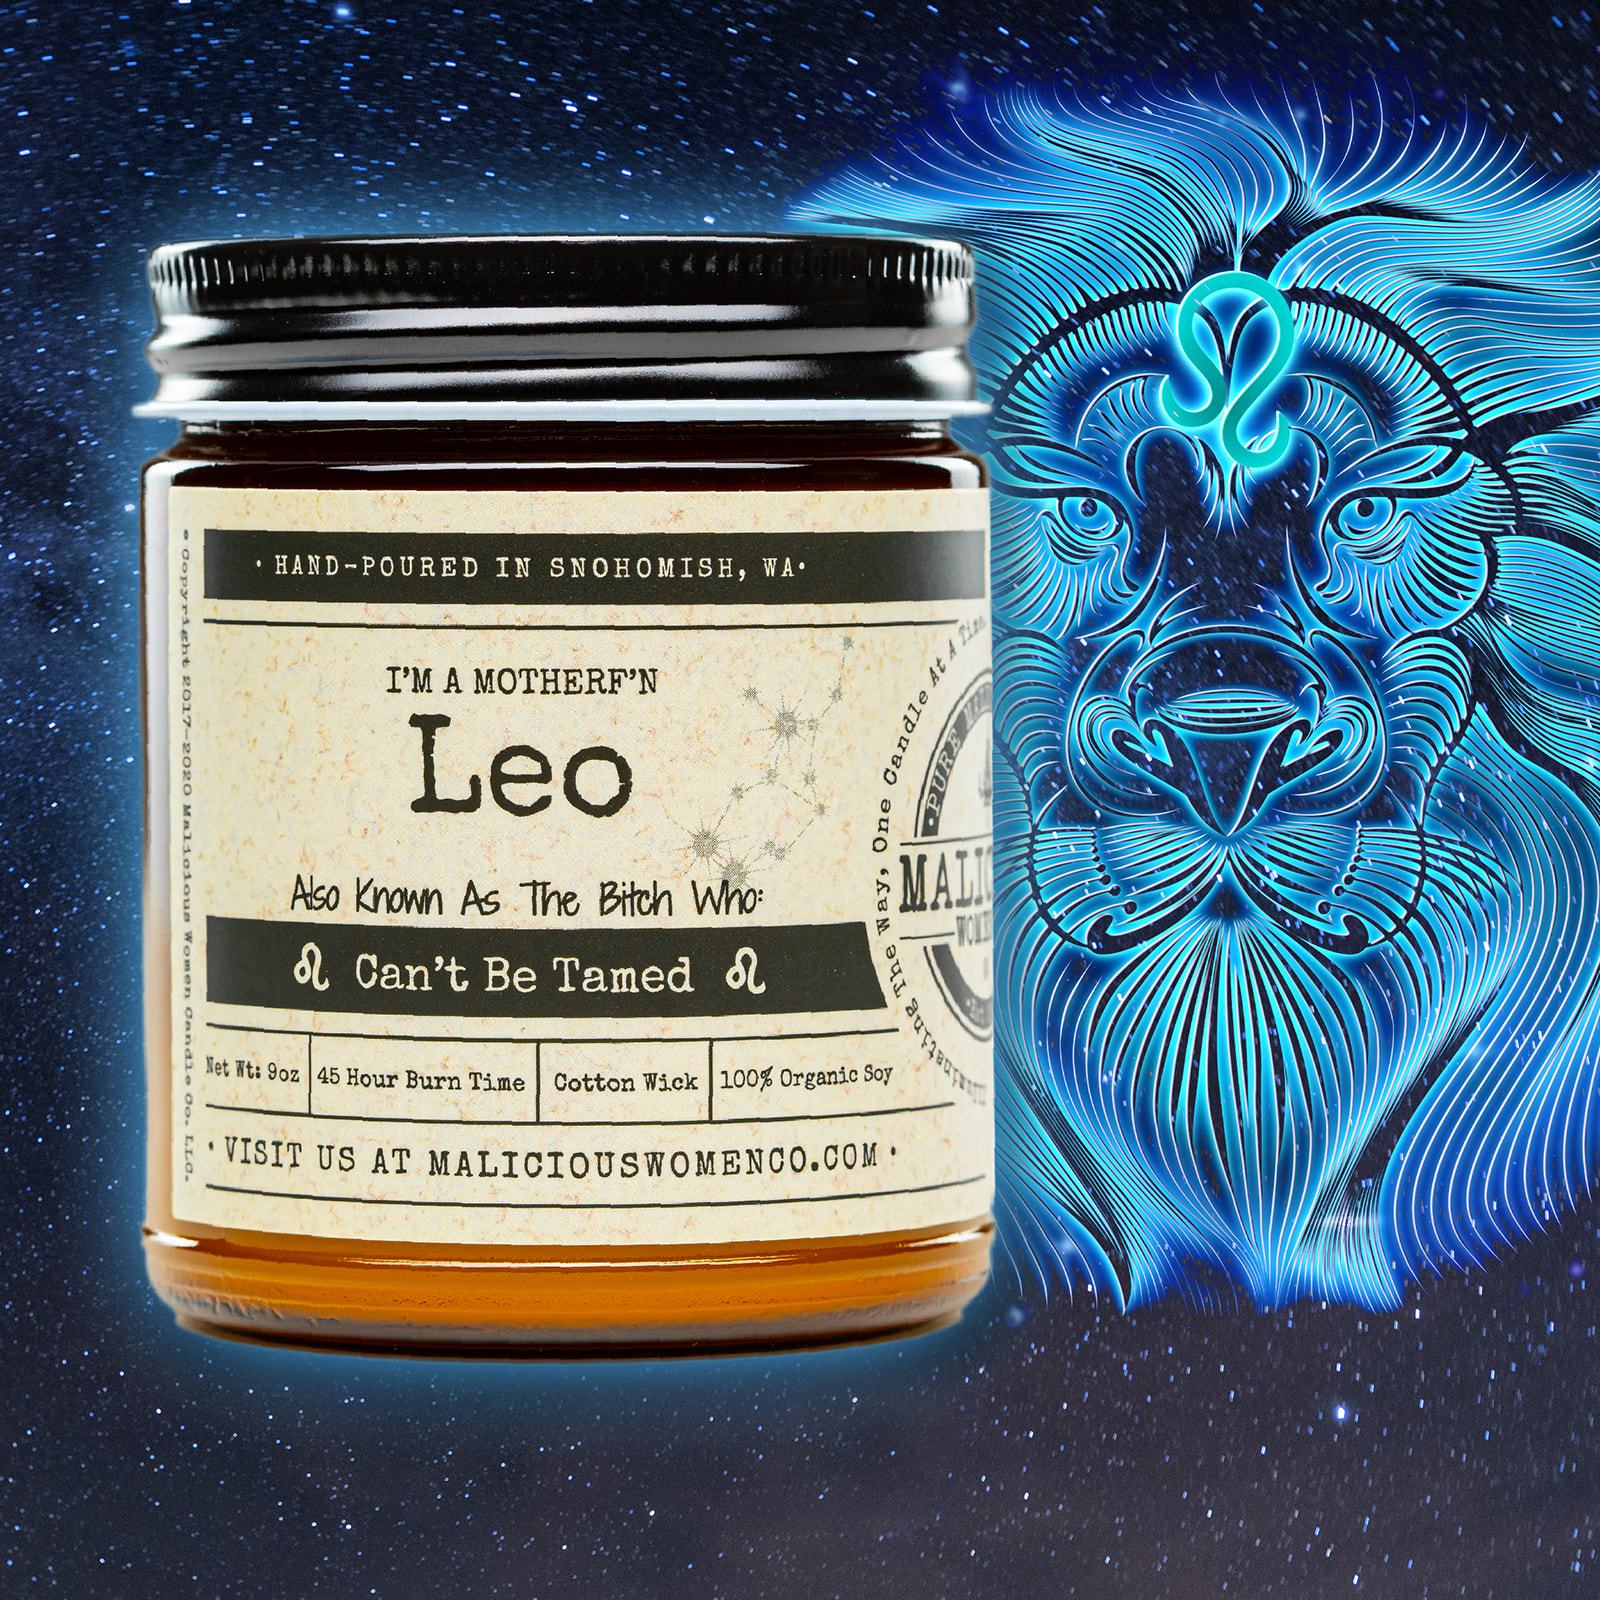 Leo (Jul 23 – Aug 23) The Zodiac Bitch-Scent: A Hot Mess Candle 2021 Malicious Women Candle Co 